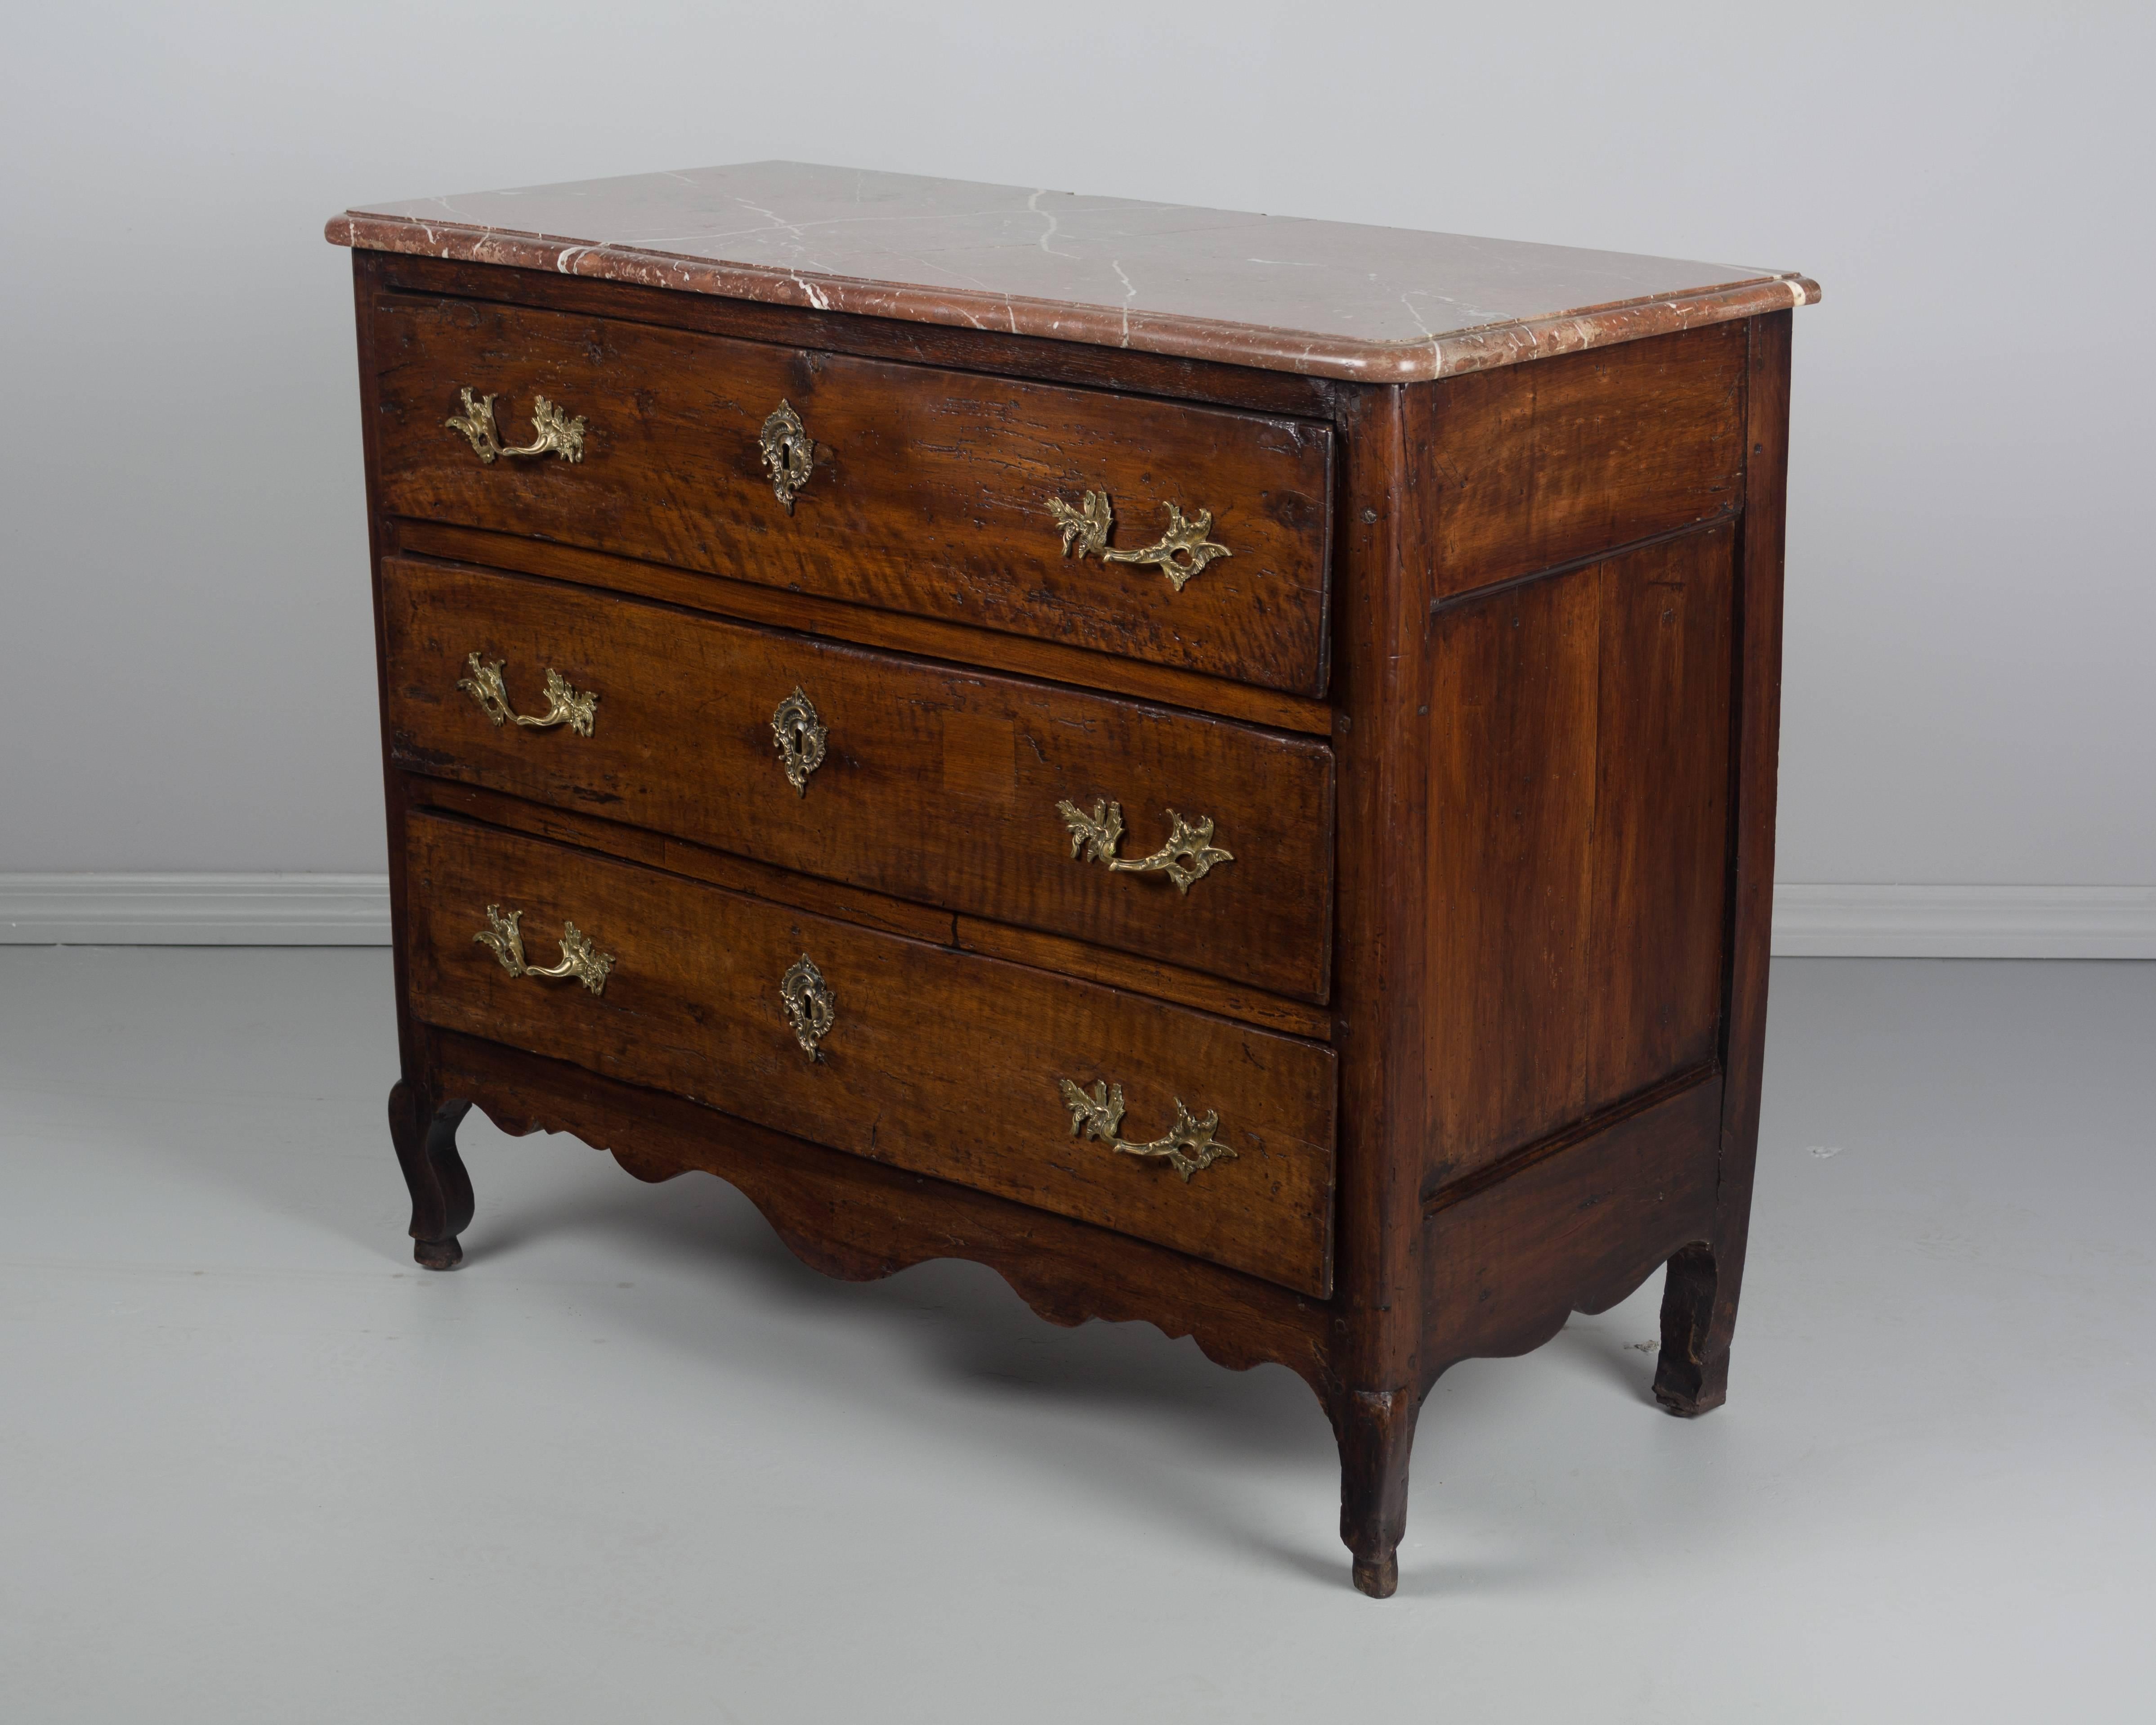 An 18th century Louis XV style Country French commode made of solid walnut with three dovetailed drawers. Original marble top has been repaired, as have the drawers and feet. Brass hardware is not original to the piece, but is of the same style and